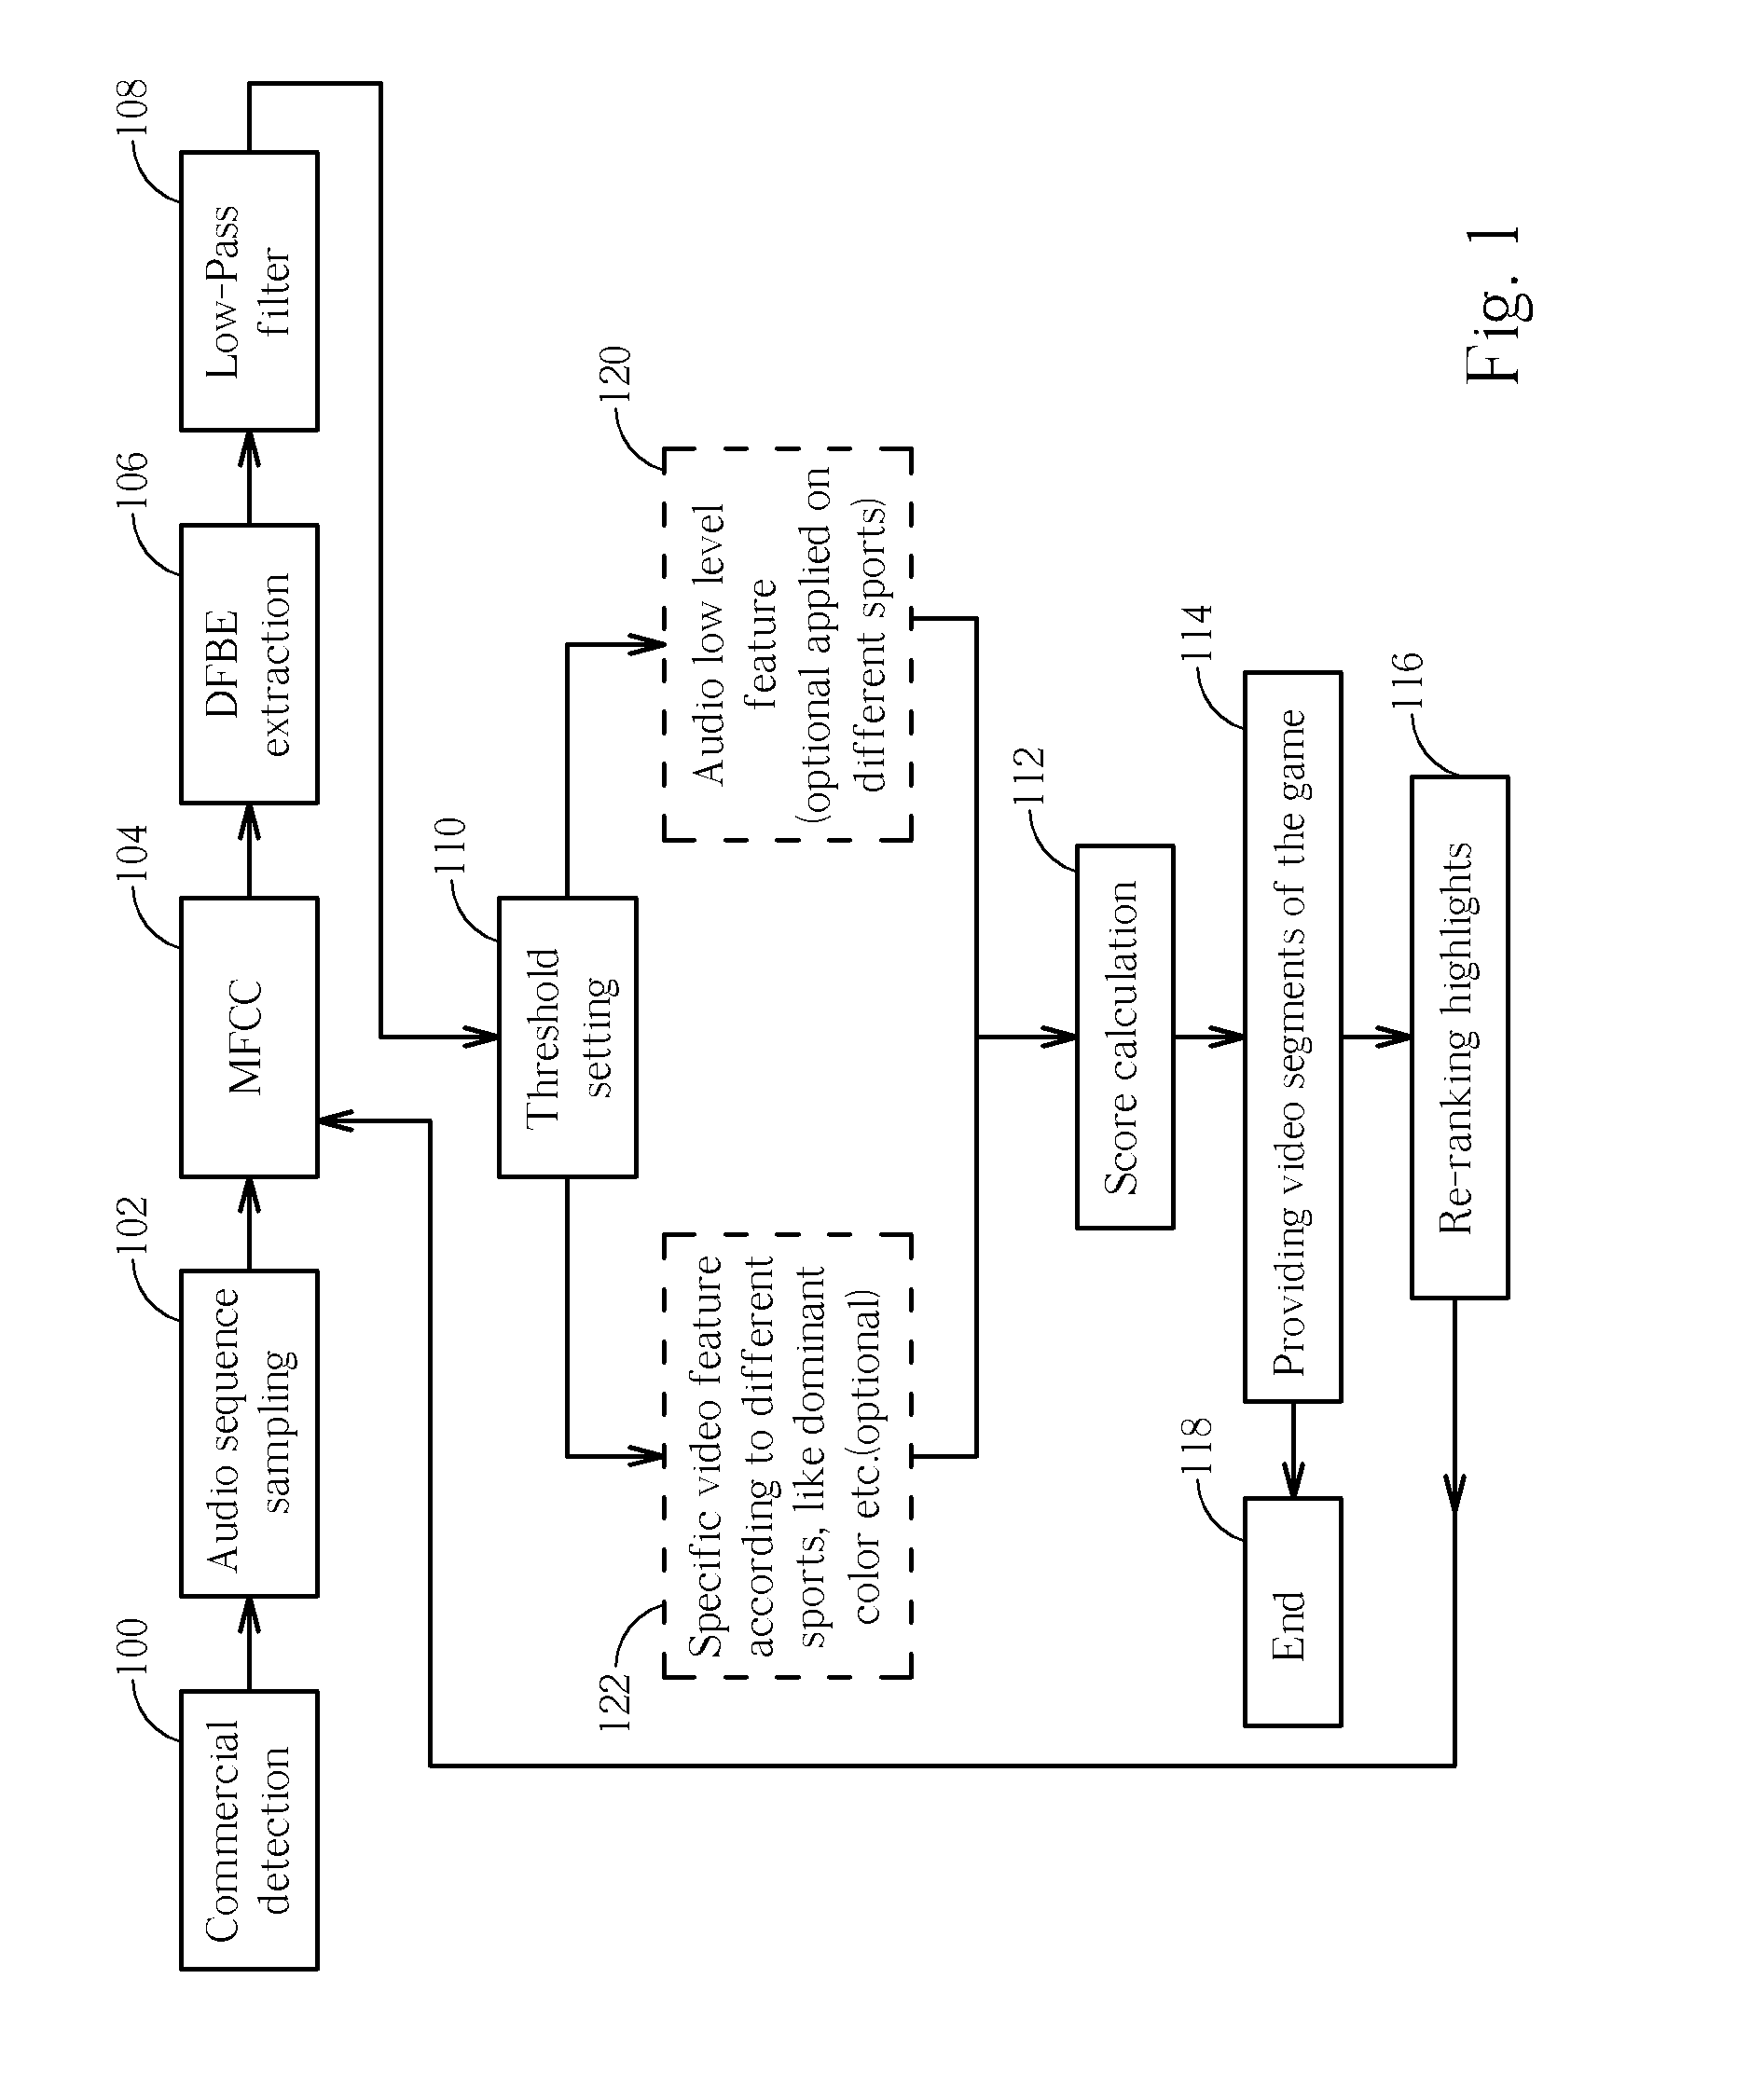 Uniform Program Indexing Method with Simple and Robust Audio Feature and Related Enhancing Methods